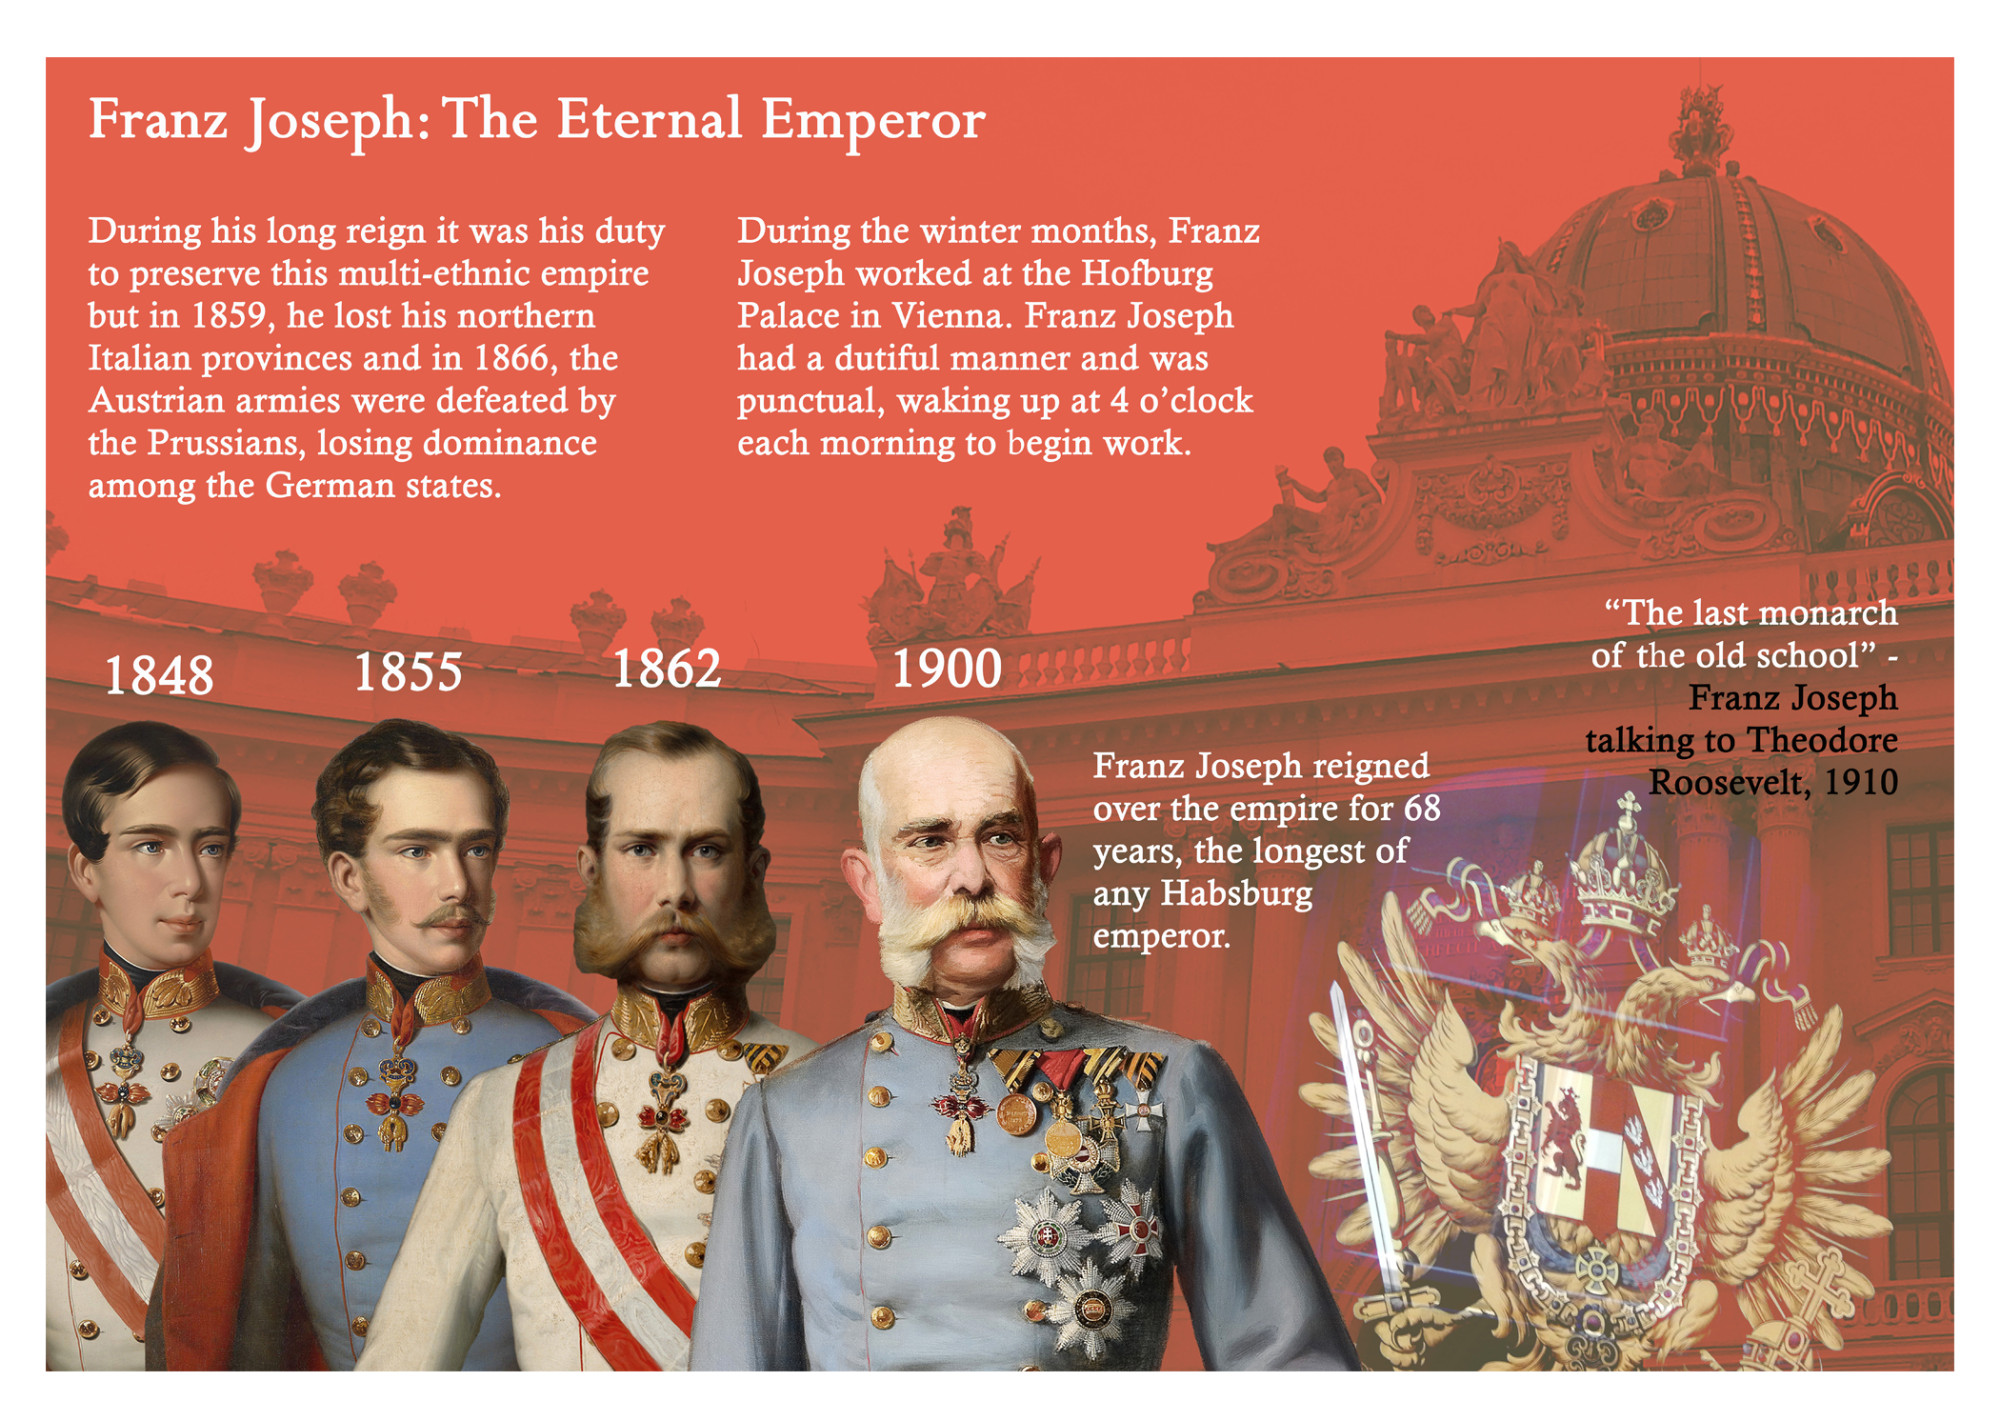 Page from double page about the life of Emperor Franz Joseph from the book "Franz Joseph and the Fall of the Habsburg Monarchy", Edmund Rogers